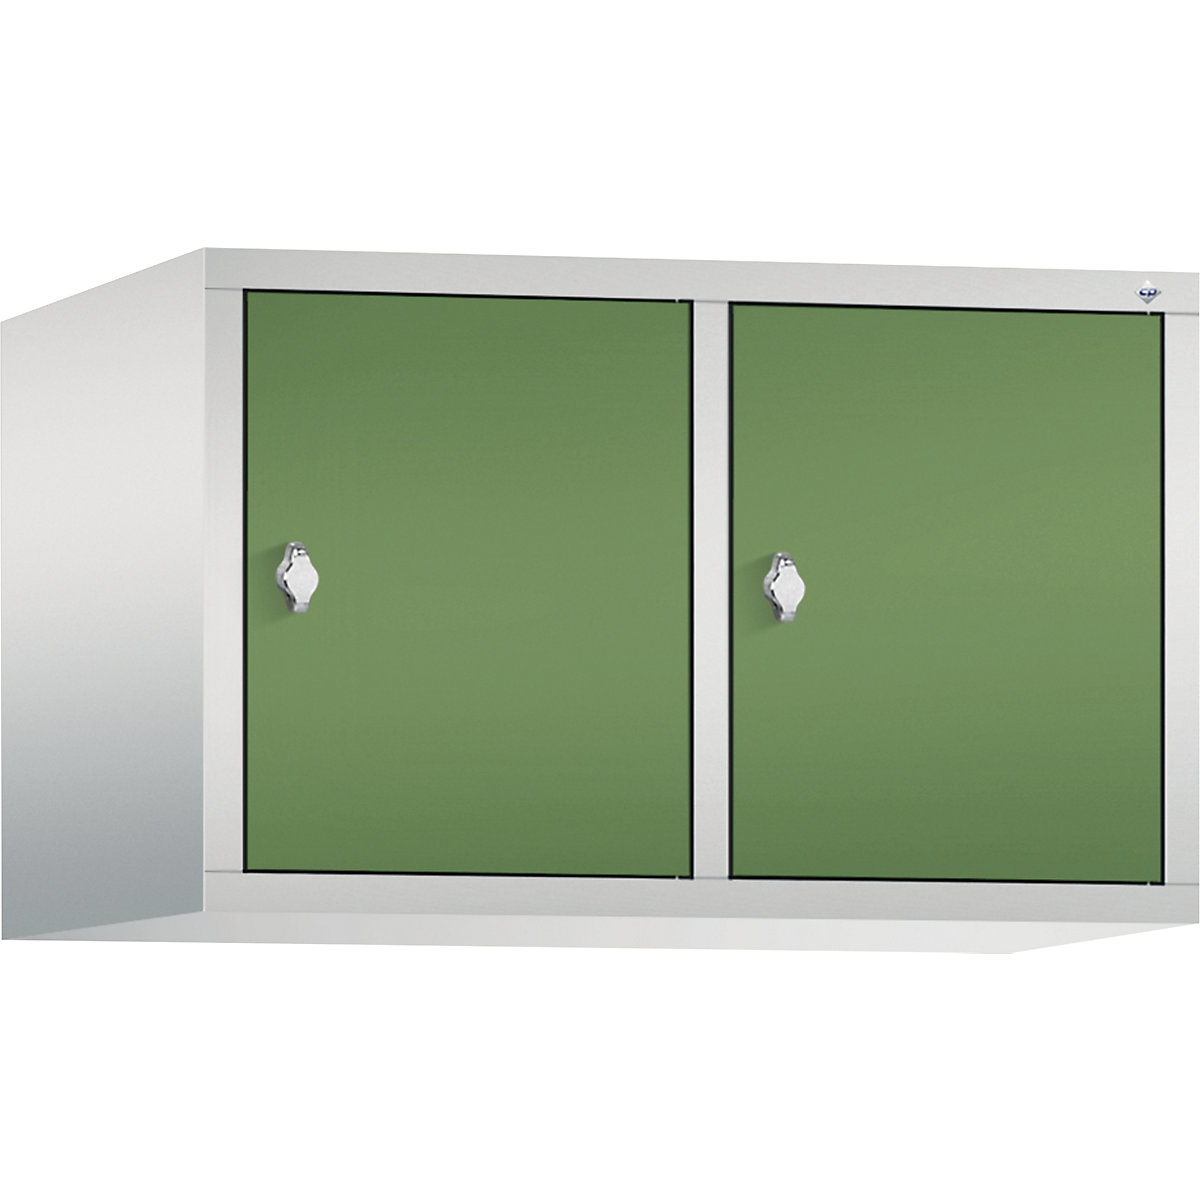 CLASSIC add-on cupboard – C+P, 2 compartments, compartment width 400 mm, light grey / reseda green-8